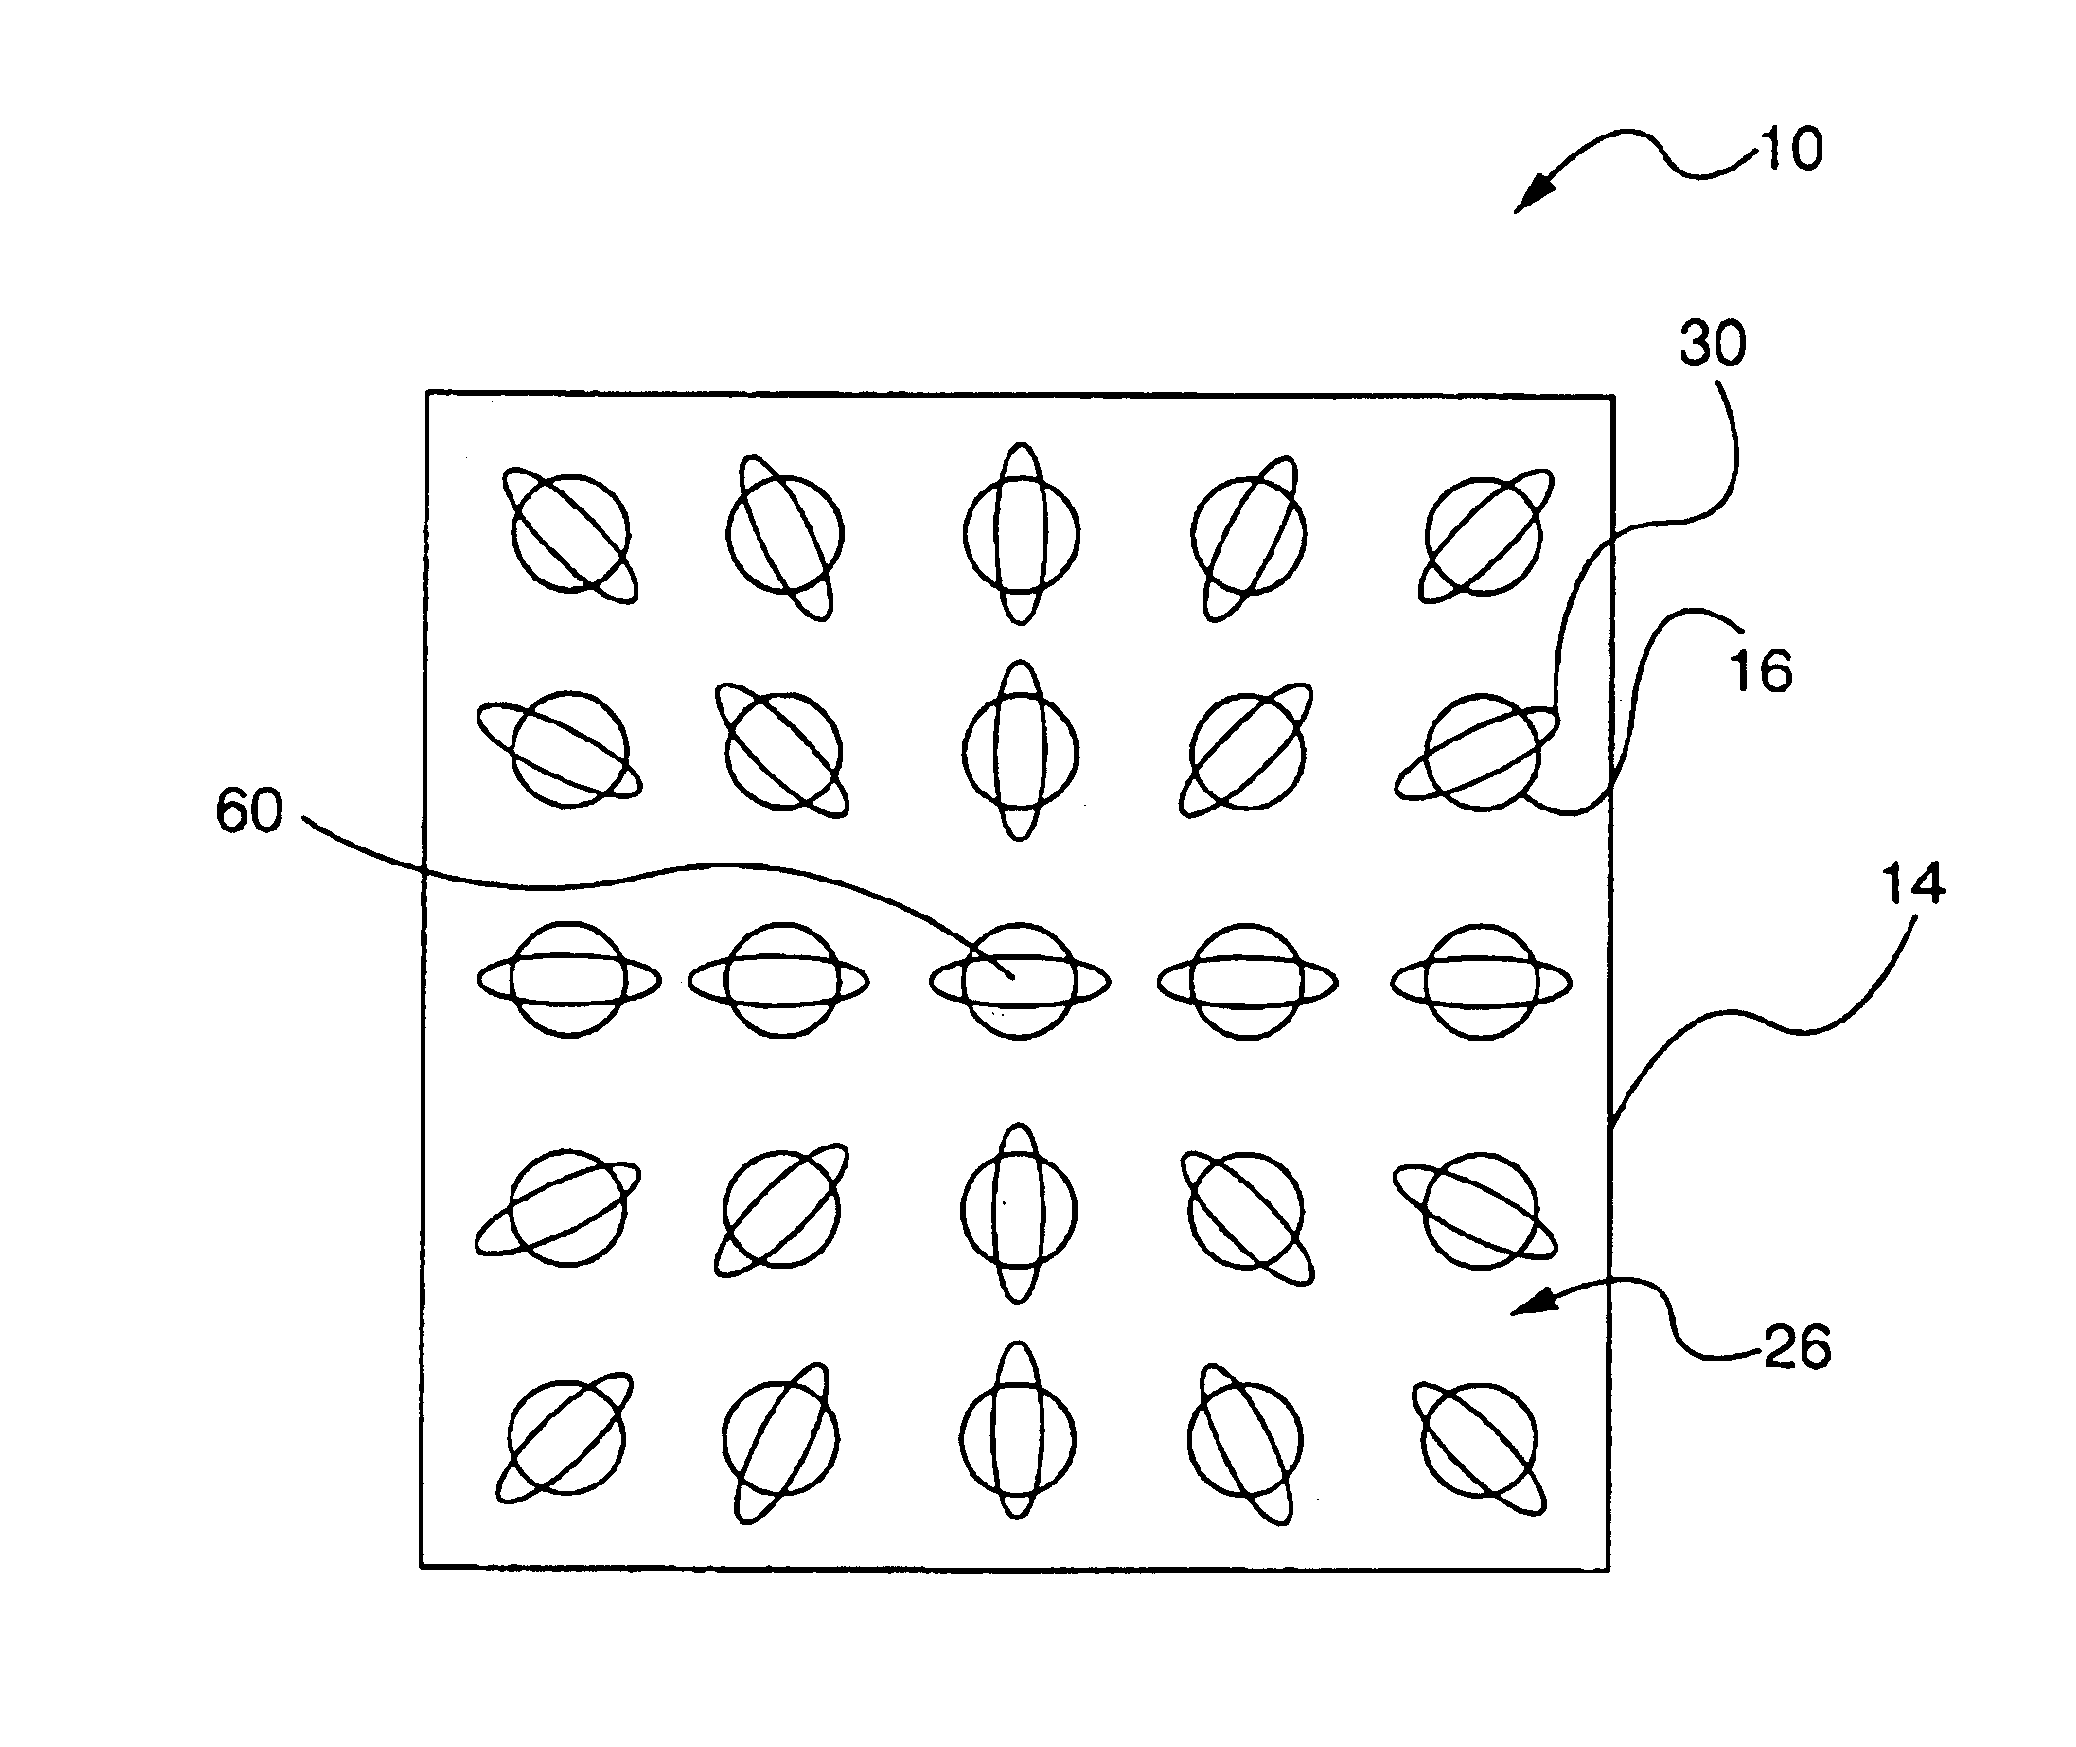 Partially captured oriented interconnections for BGA packages and a method of forming the interconnections